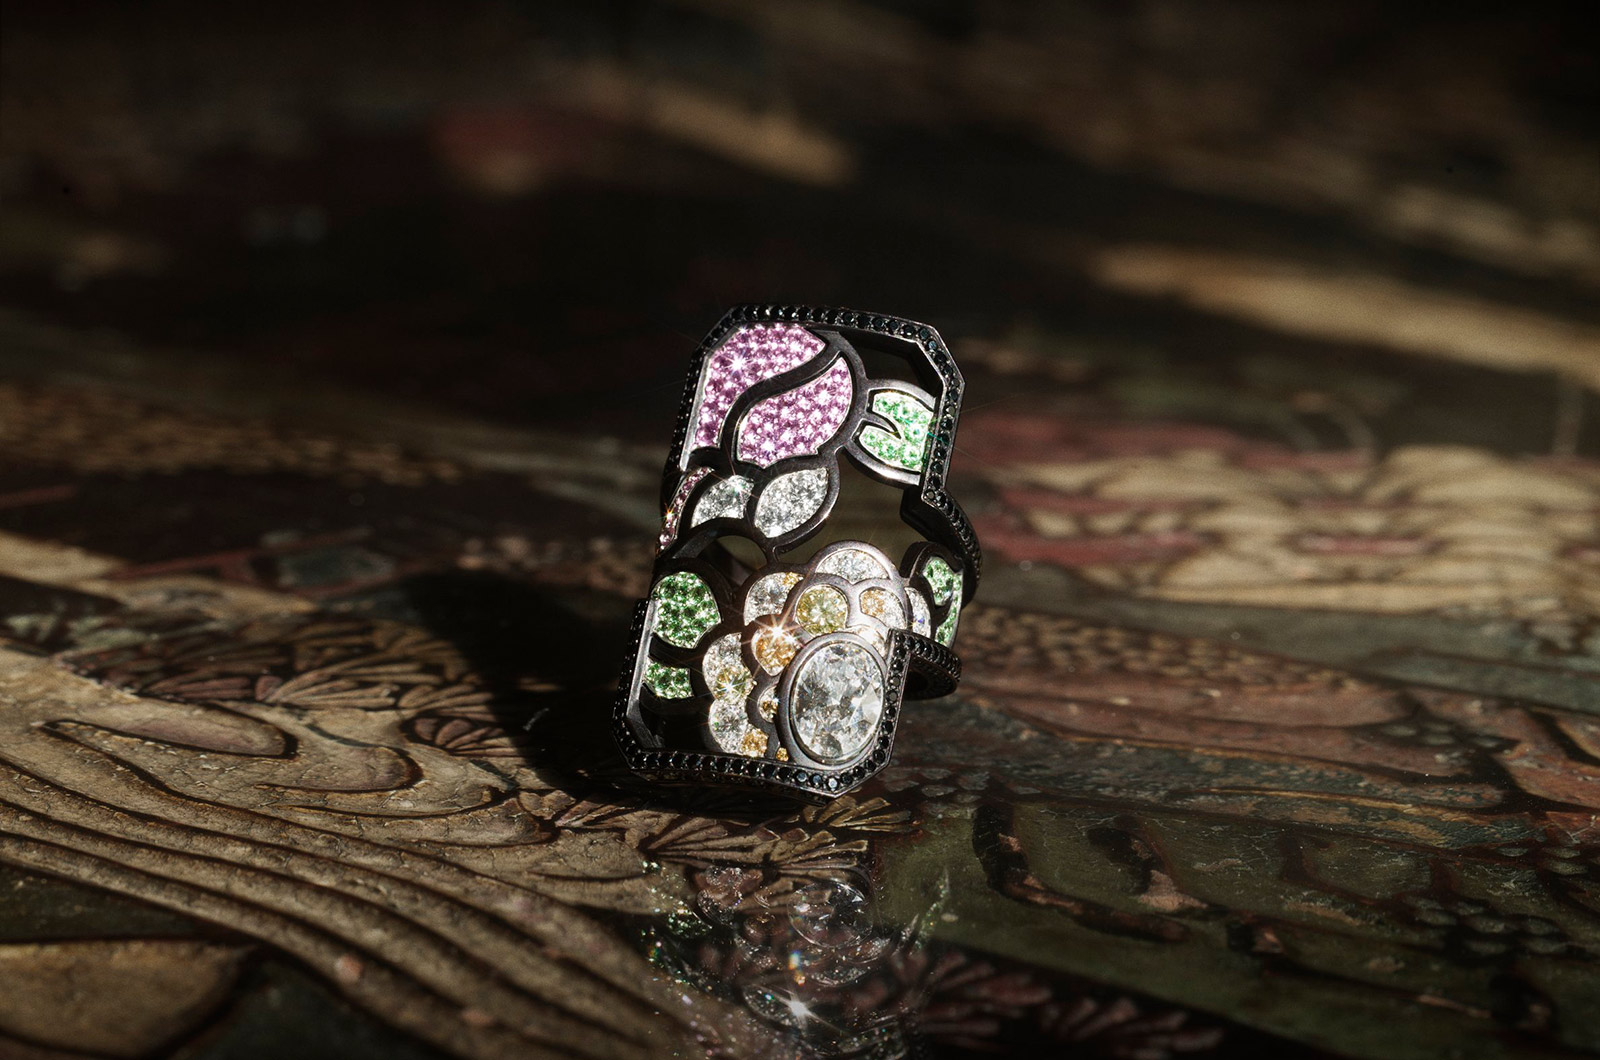 Chanel ‘Calligraphie Florale’ ring from the 'Coromandel' collection with colourless diamonds, brown diamonds, pink sapphires, black spinels and tsavorite garnets